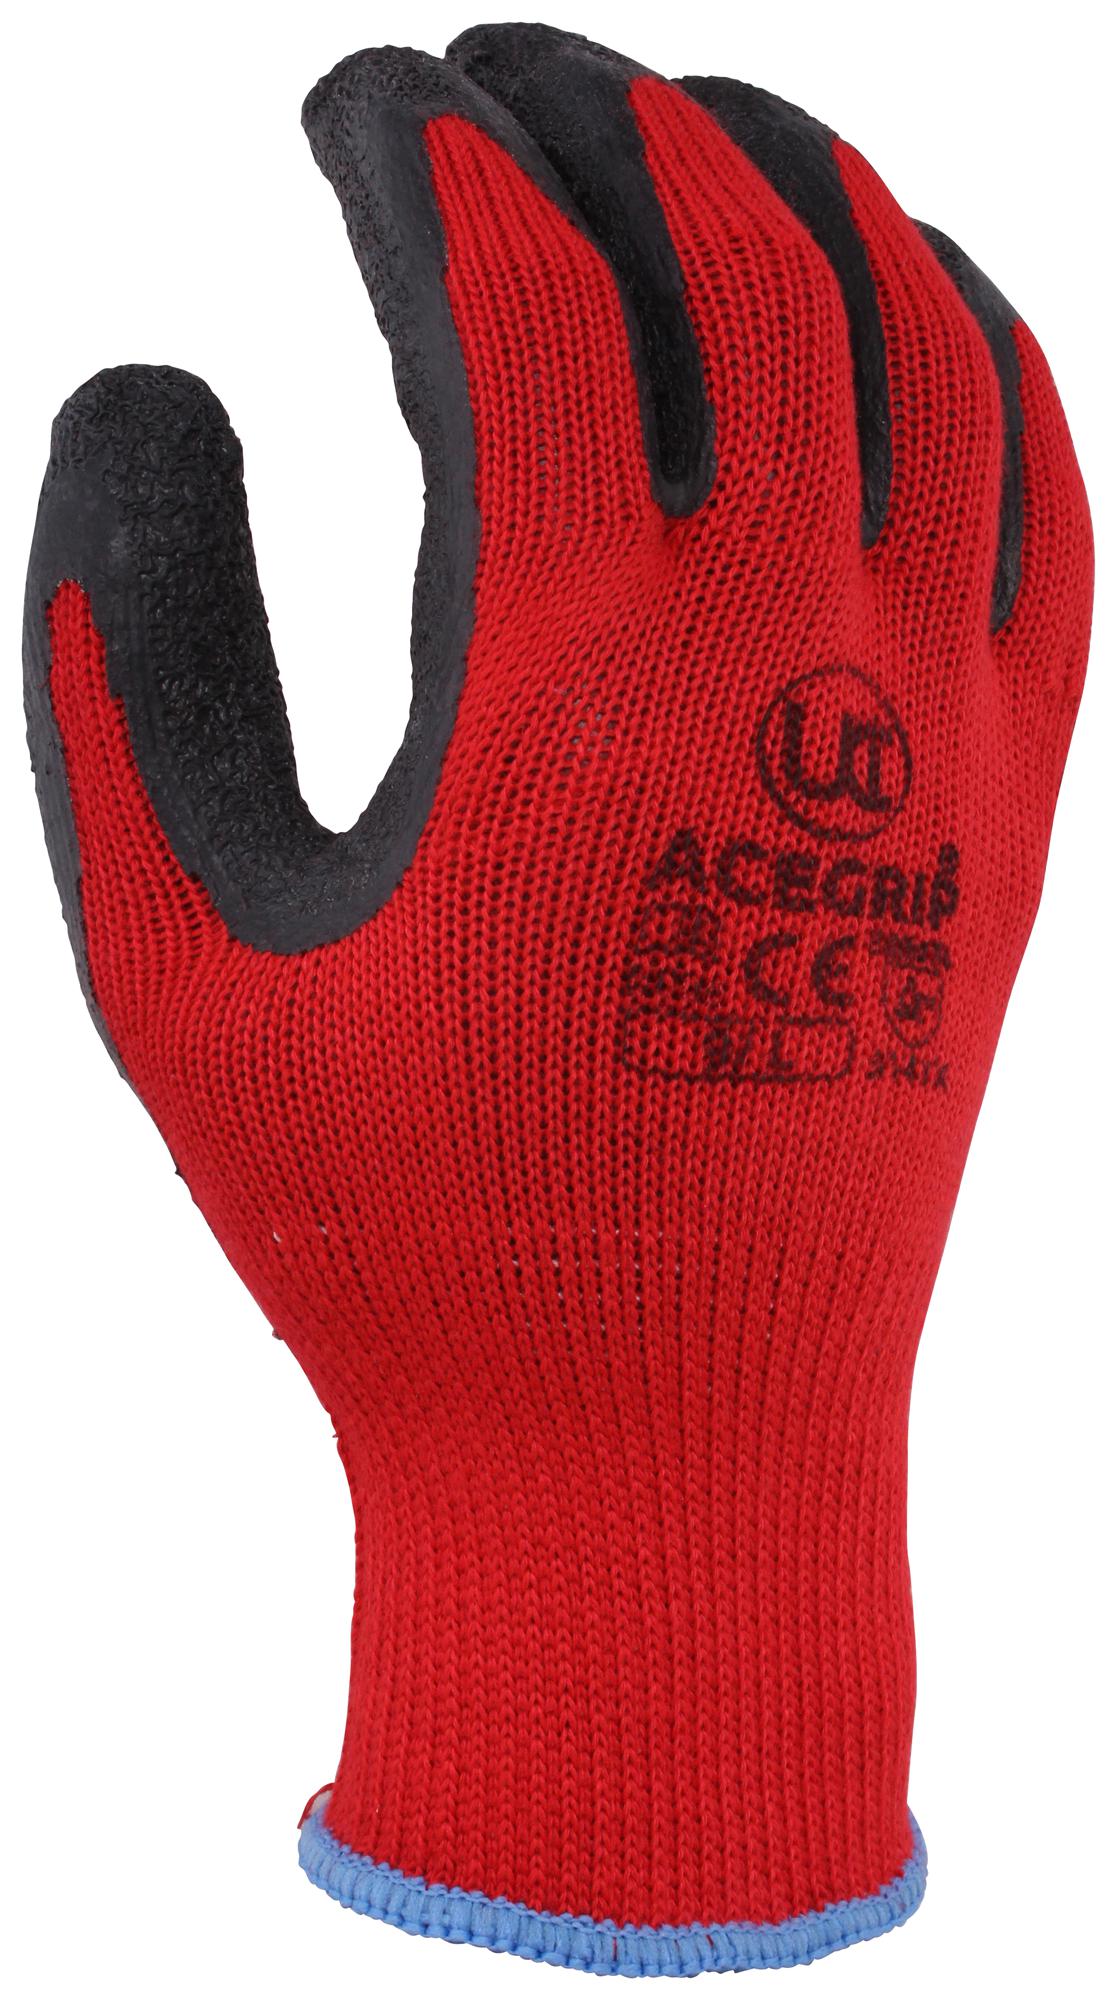 Uci G/acegrip-Rp/red/09 Gloves, Polycotton Liner, Red, L